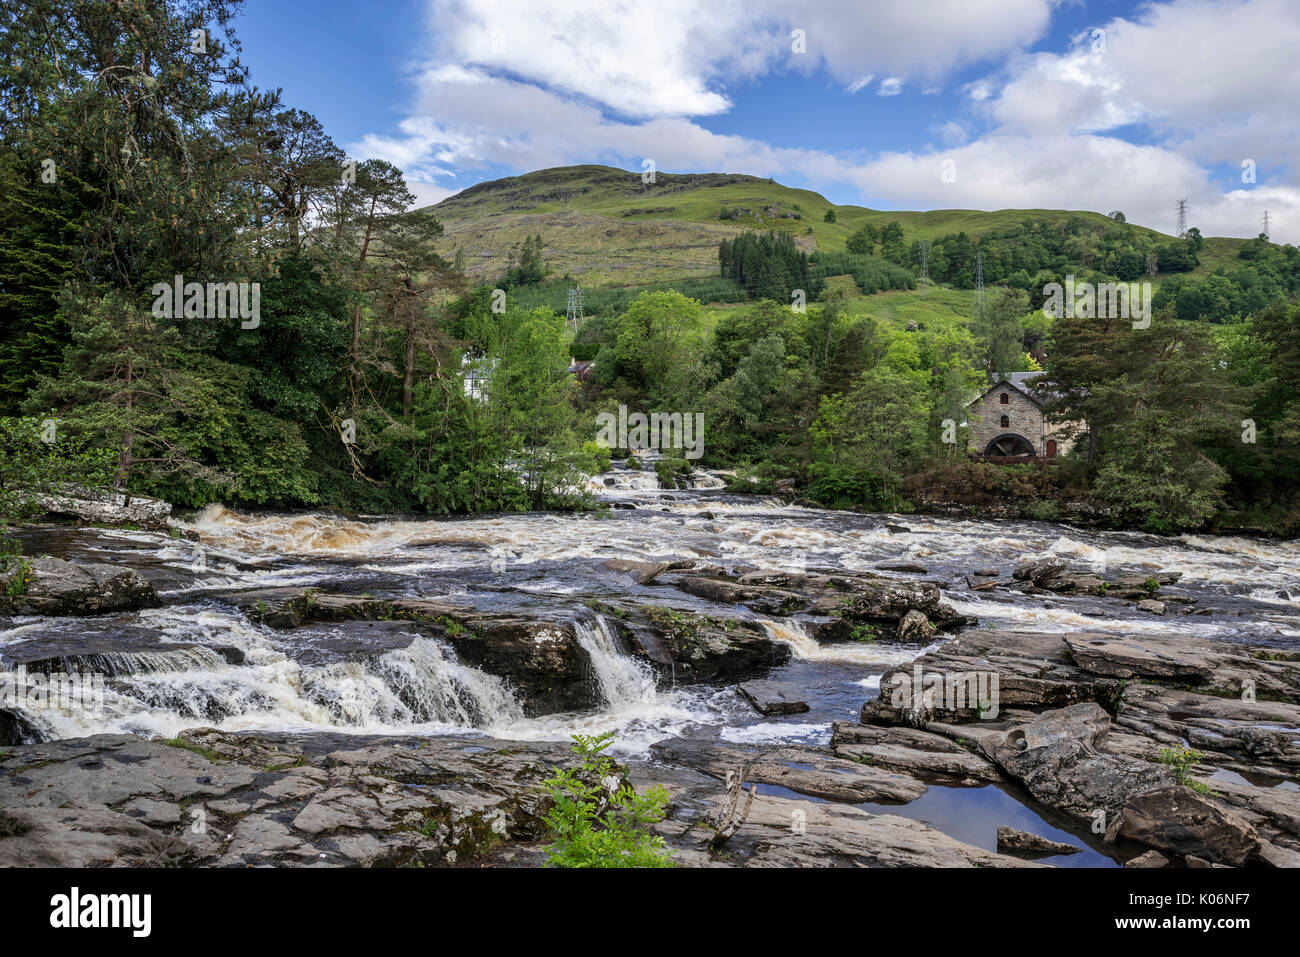 Falls of Dochart in the village Killin and the Old Mill / St Fillan's Mill, Loch Lomond & The Trossachs National Park, Stirling, Scotland, UK Stock Photo